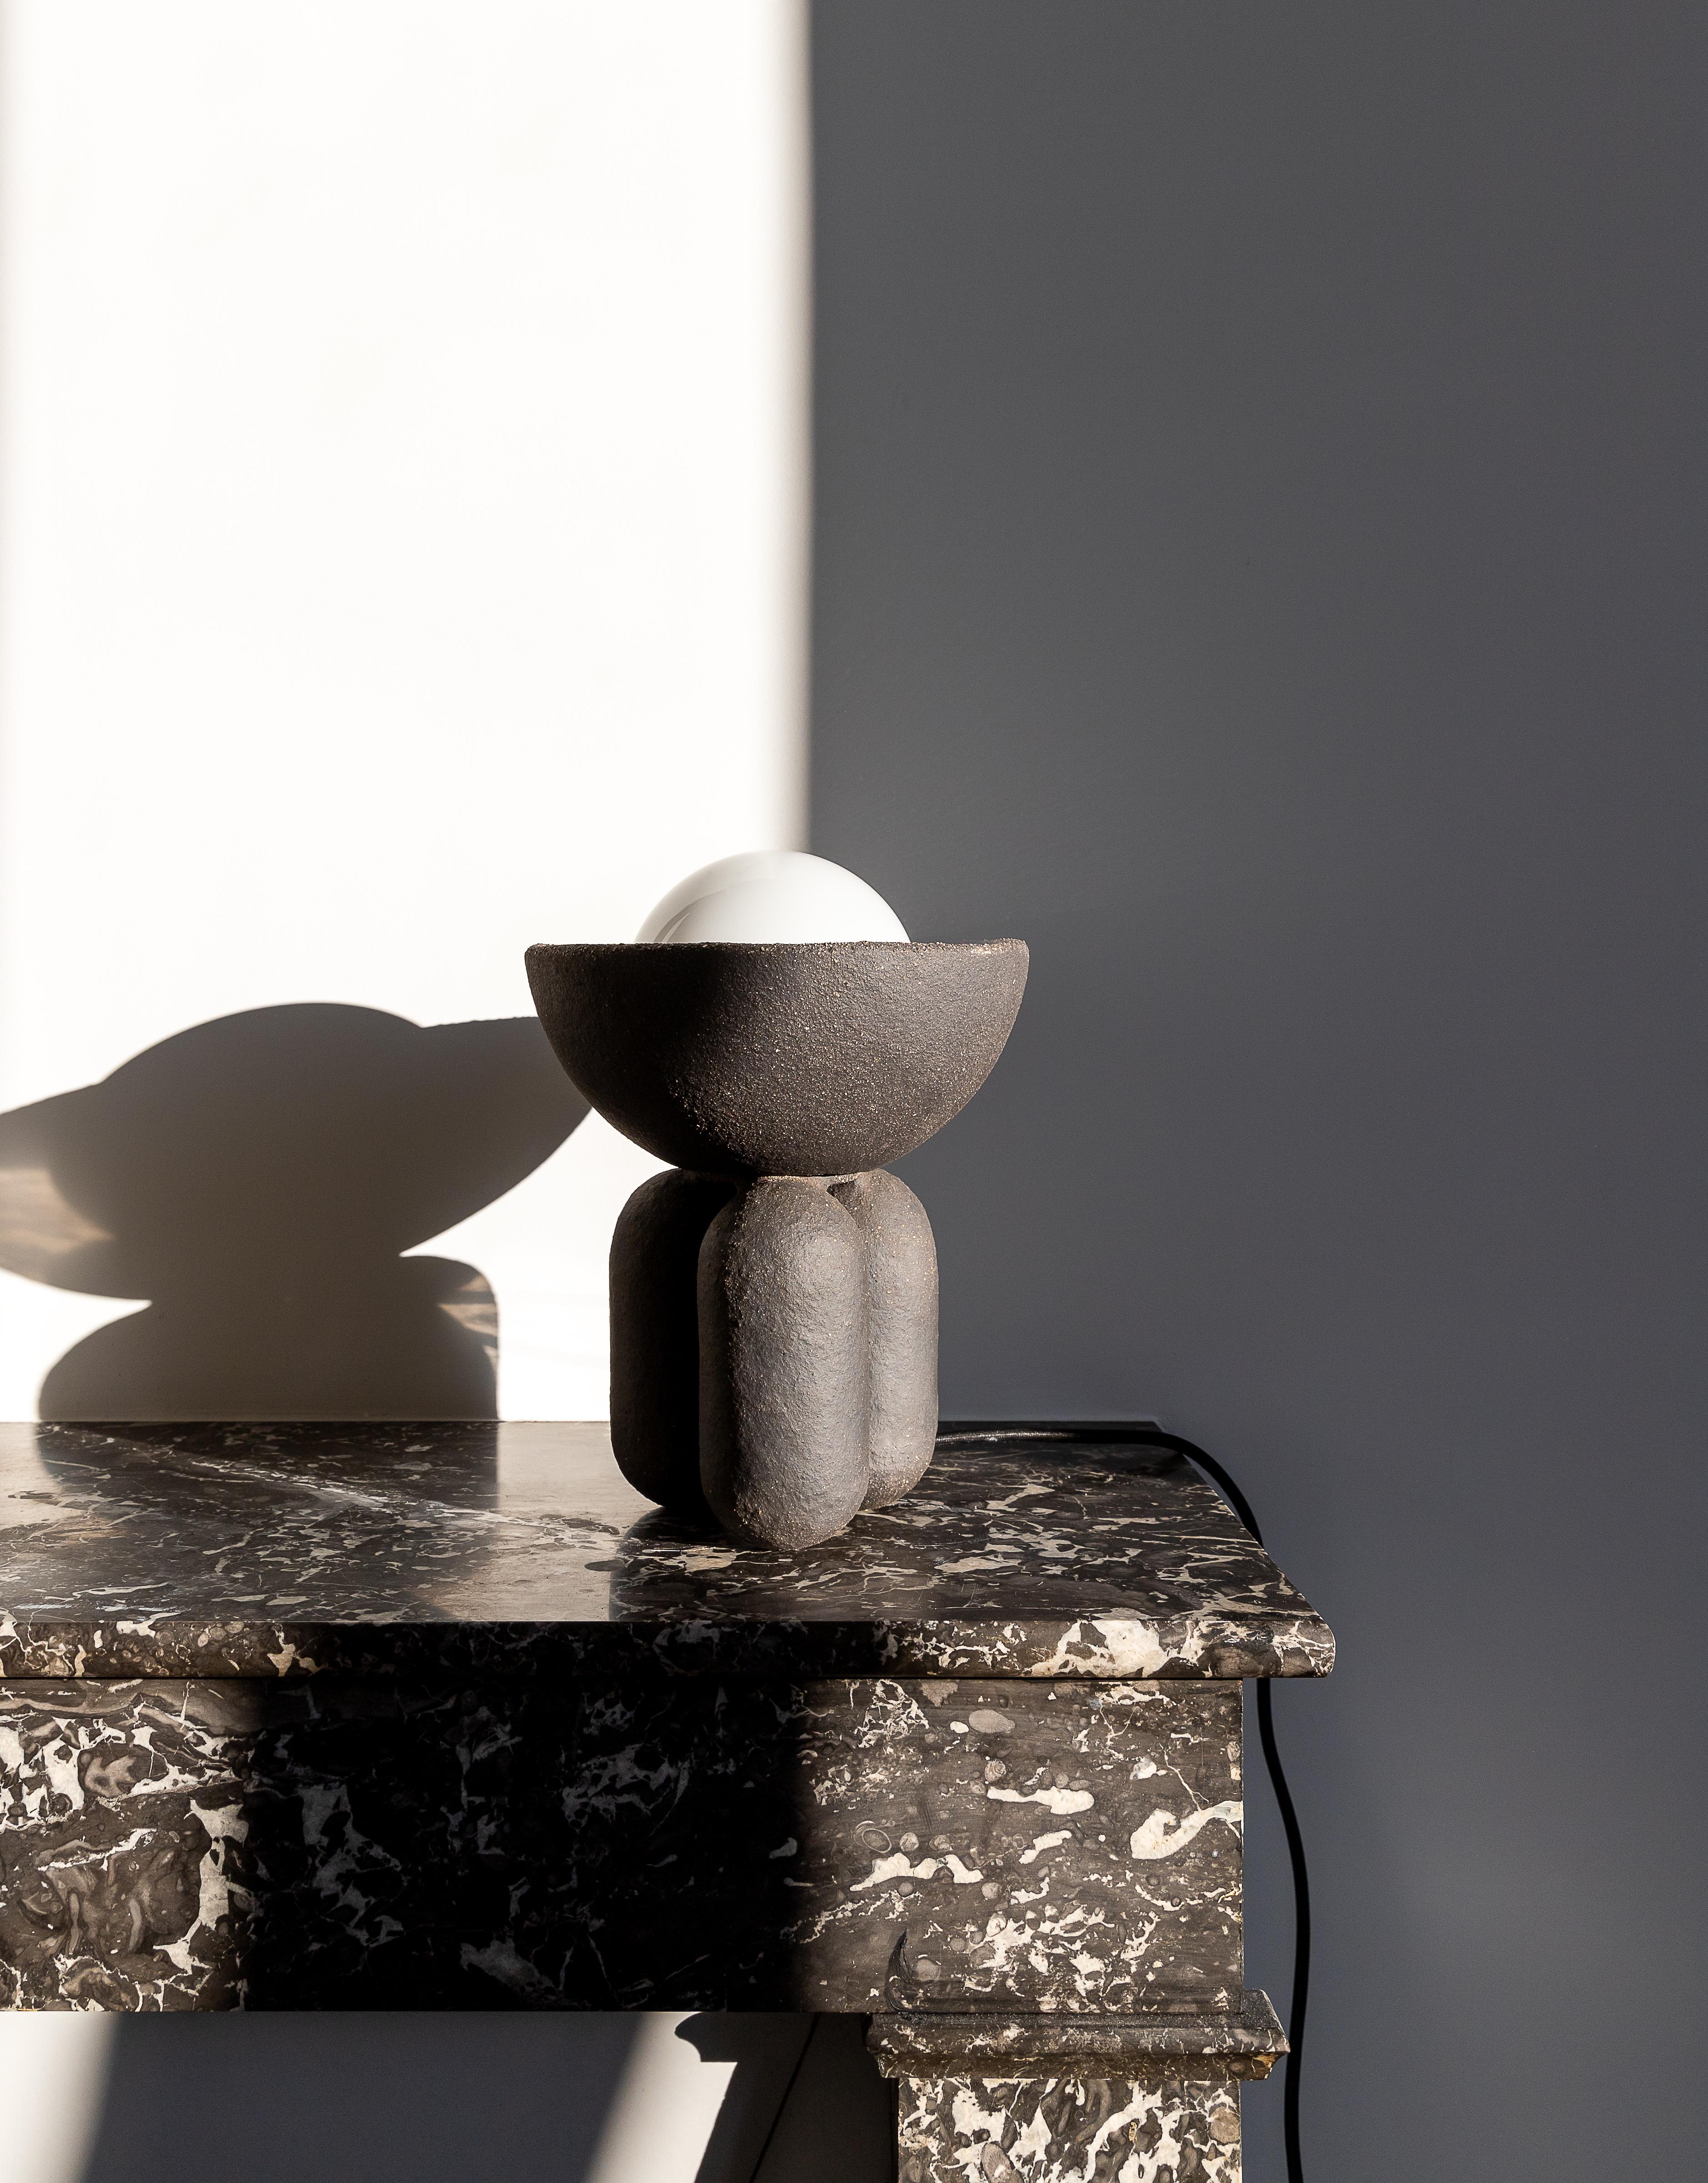 Black small half sphere lamp by Lisa Allegra
Dimensions: Ø 20 x 27 cm
Materials: Clay
Also available in dusty pink finish. Please contact us.
Born in 1986 in Paris, Lisa Allegra has earned in 2010 a degree in furniture design from the École